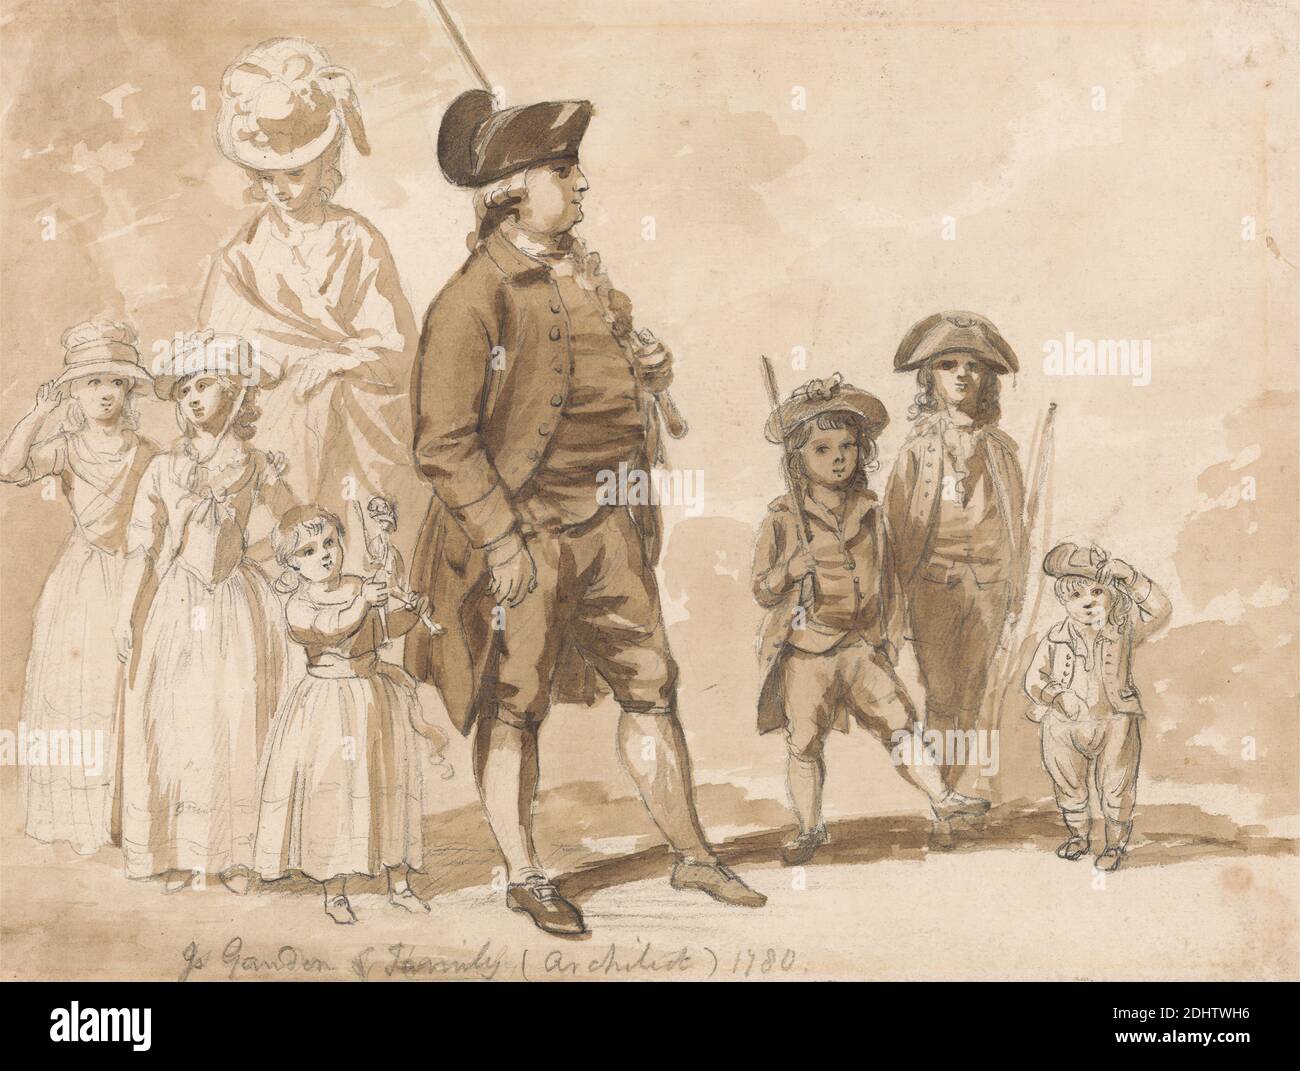 James Gandon and Family, Paul Sandby RA, 1731–1809, British, 1780, Brown wash, graphite, and pen and brown ink on medium, cream, slightly textured wove paper, Sheet: 5 3/4 x 7 5/8 inches (14.6 x 19.4 cm), architect, brothers, children, daughters, doll, dolls, family, father, hats, leisure, mother, portrait, siblings, sisters, soldiers, sons, toys Stock Photo